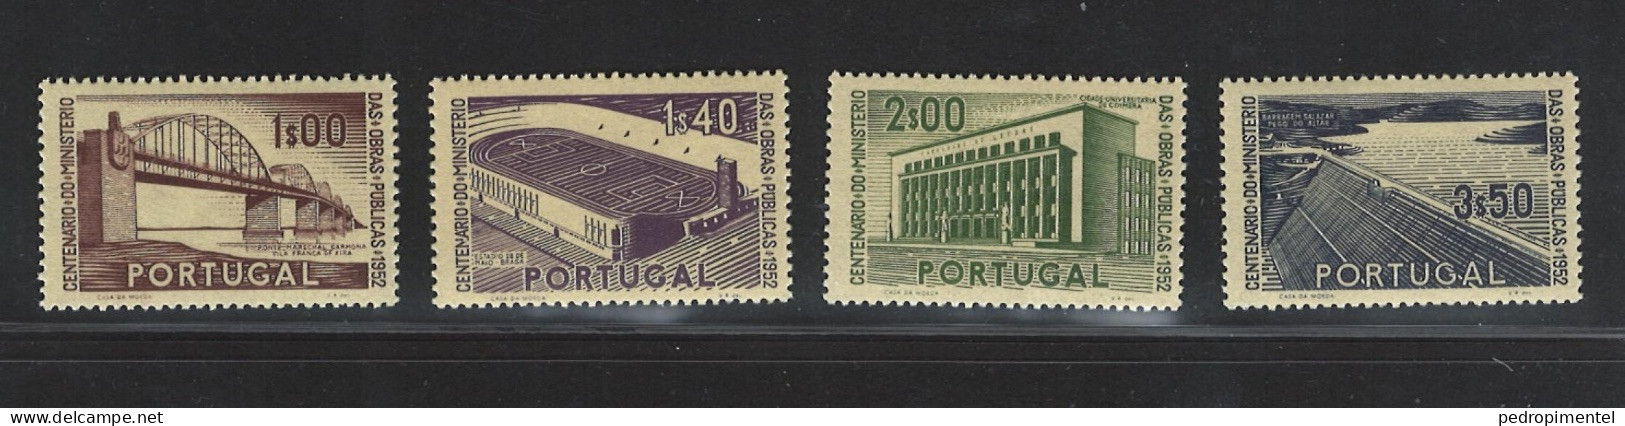 Portugal Stamps 1952 "Public Works" Condition MNH #755-758 - Nuevos